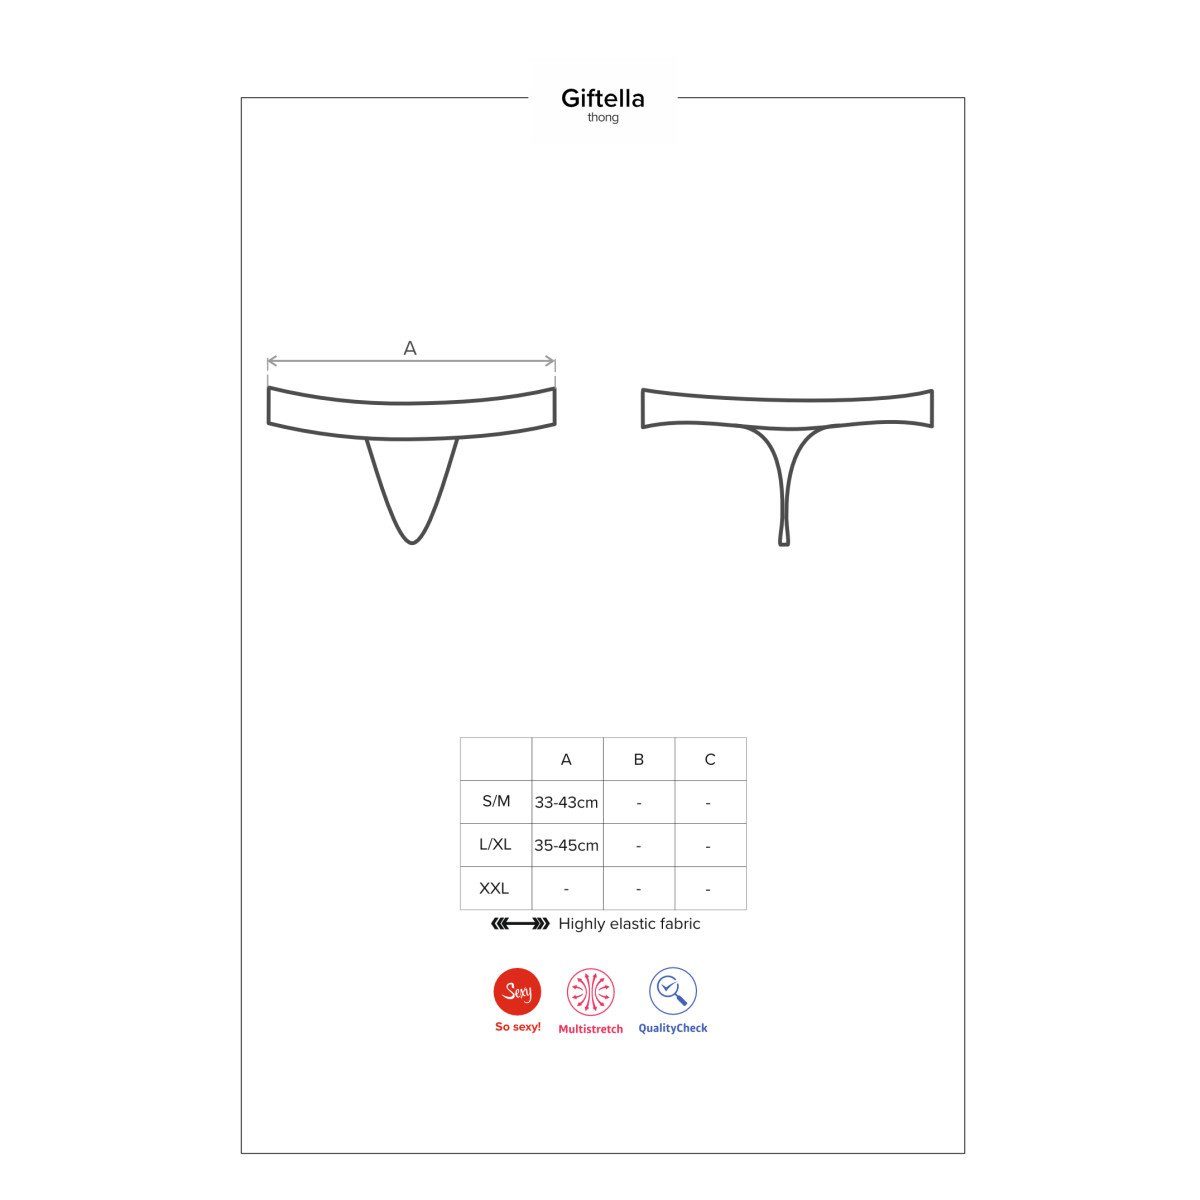 thong OB - Obsessive red (L/XL,S/M) Giftella Panty